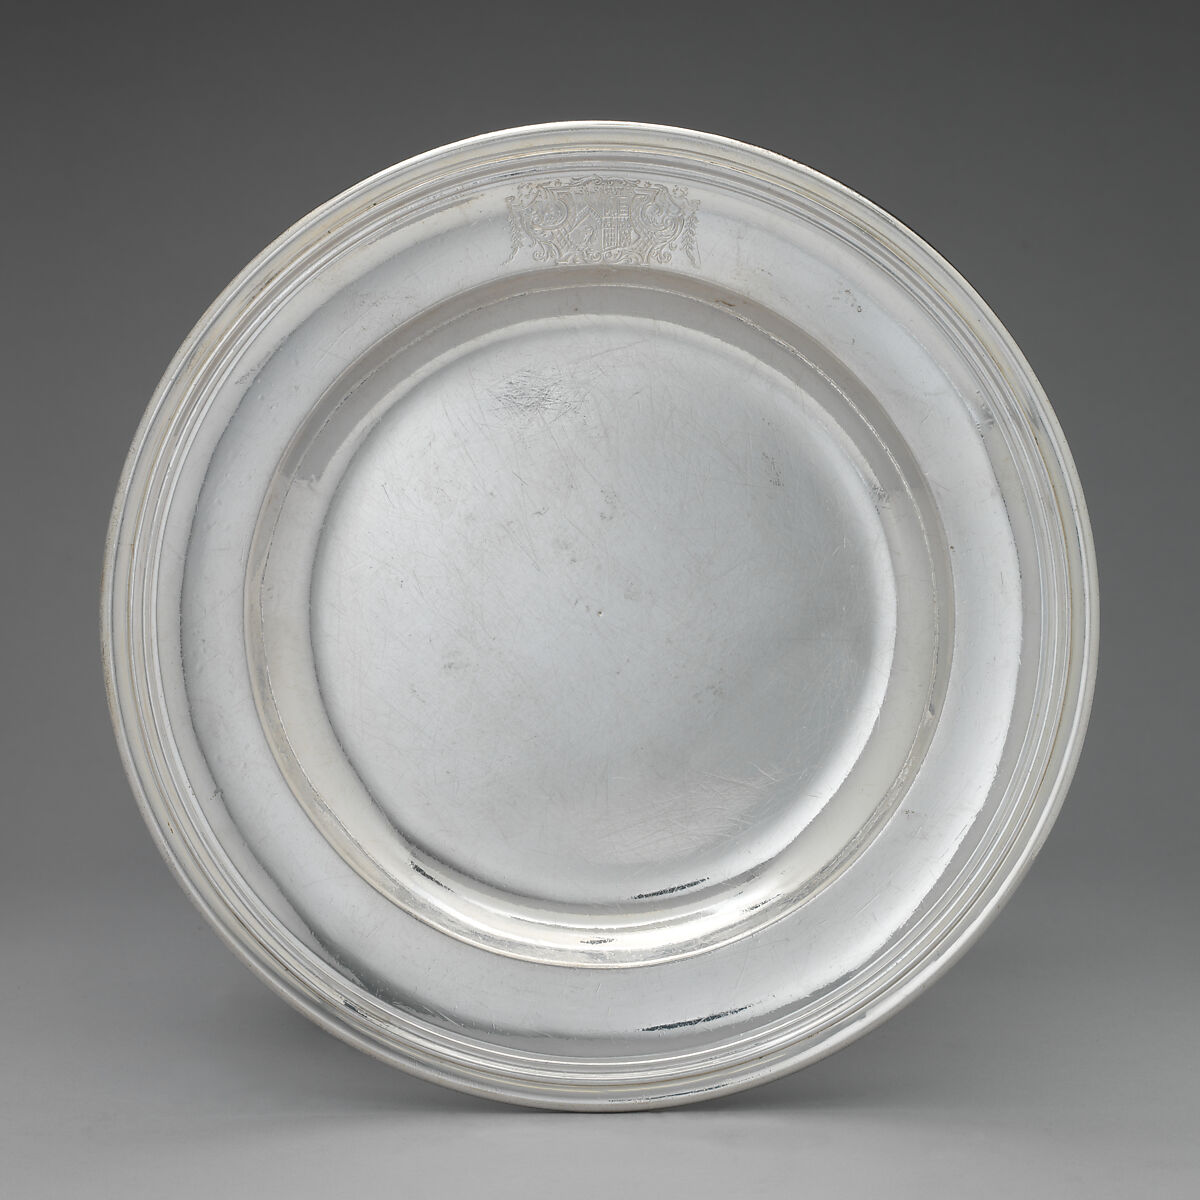 Plate (one of a set of twelve), Thomas Farren (British, active ca. 1707–d. 1743), Silver, British, London 